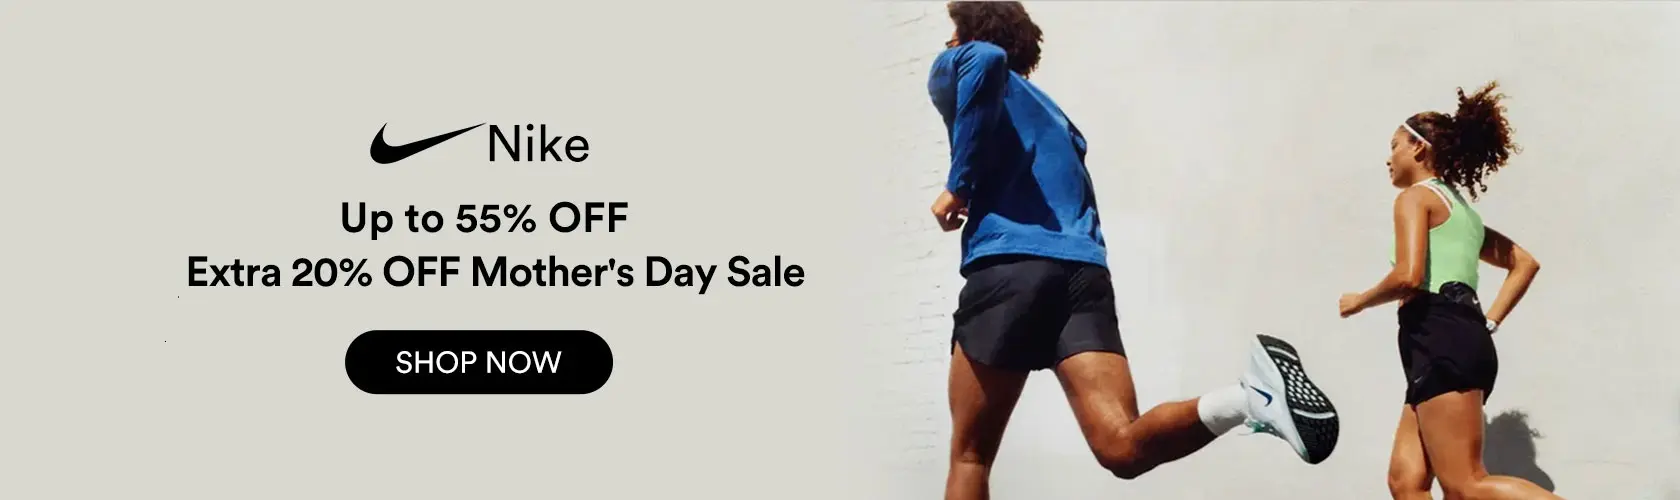 Nike: Up to 55% OFF + Extra 20% OFF Mother's Day Sale